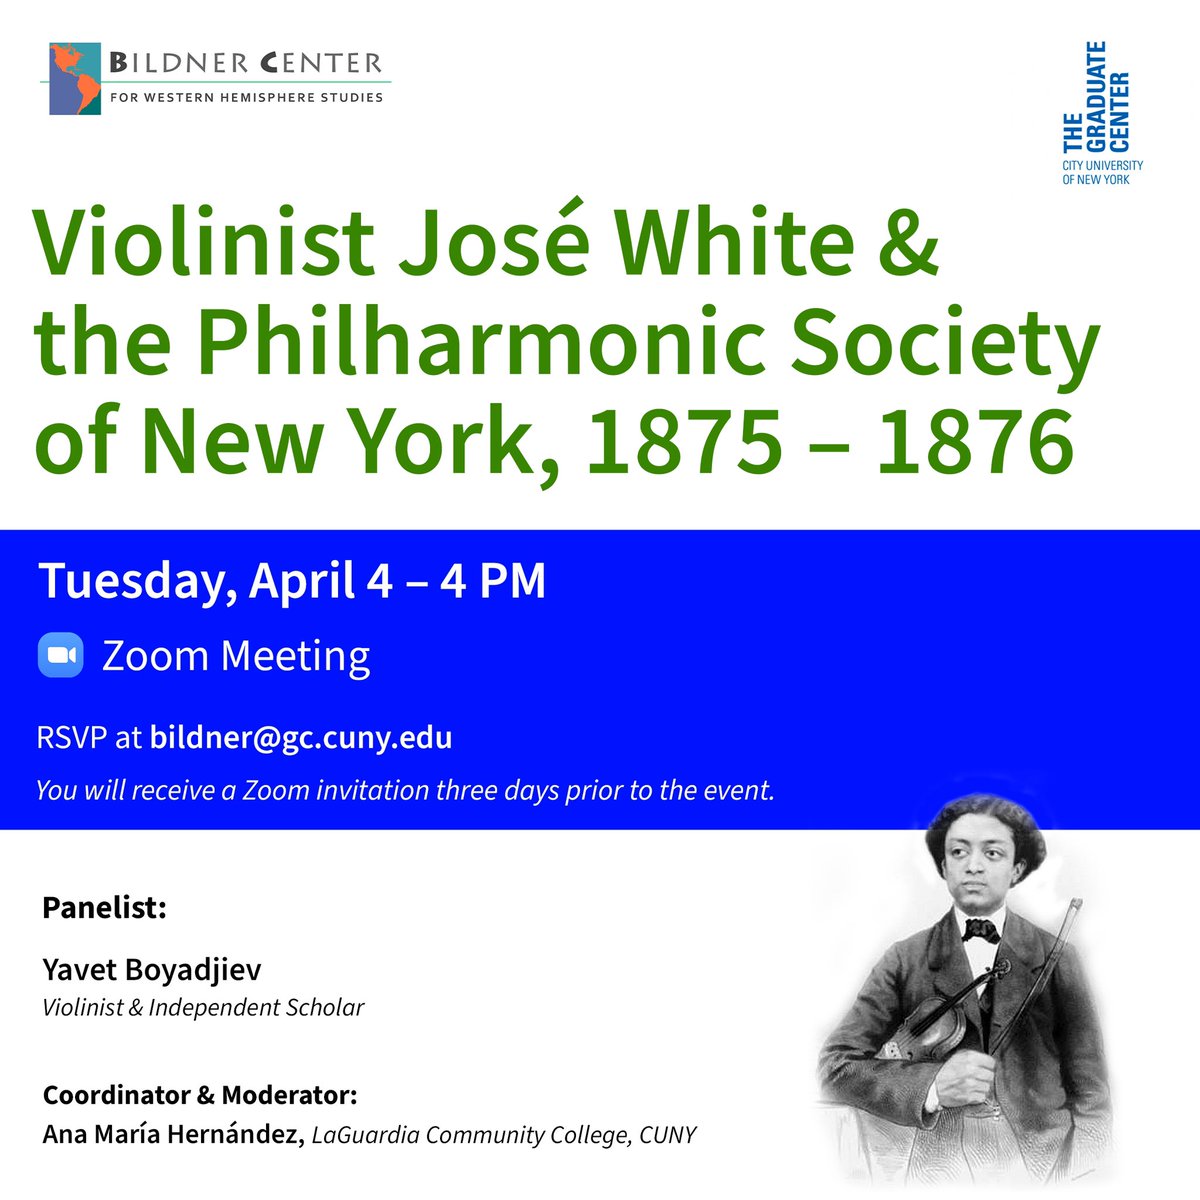 Join us on April 4th at 4 PM via #Zoom for a discussion on “Violinist José White & the Philharmonic Society of New York, 1875-1876.”

RSVP at bildner@gc.cuny.edu

@GC_CUNY @GradCenterNews